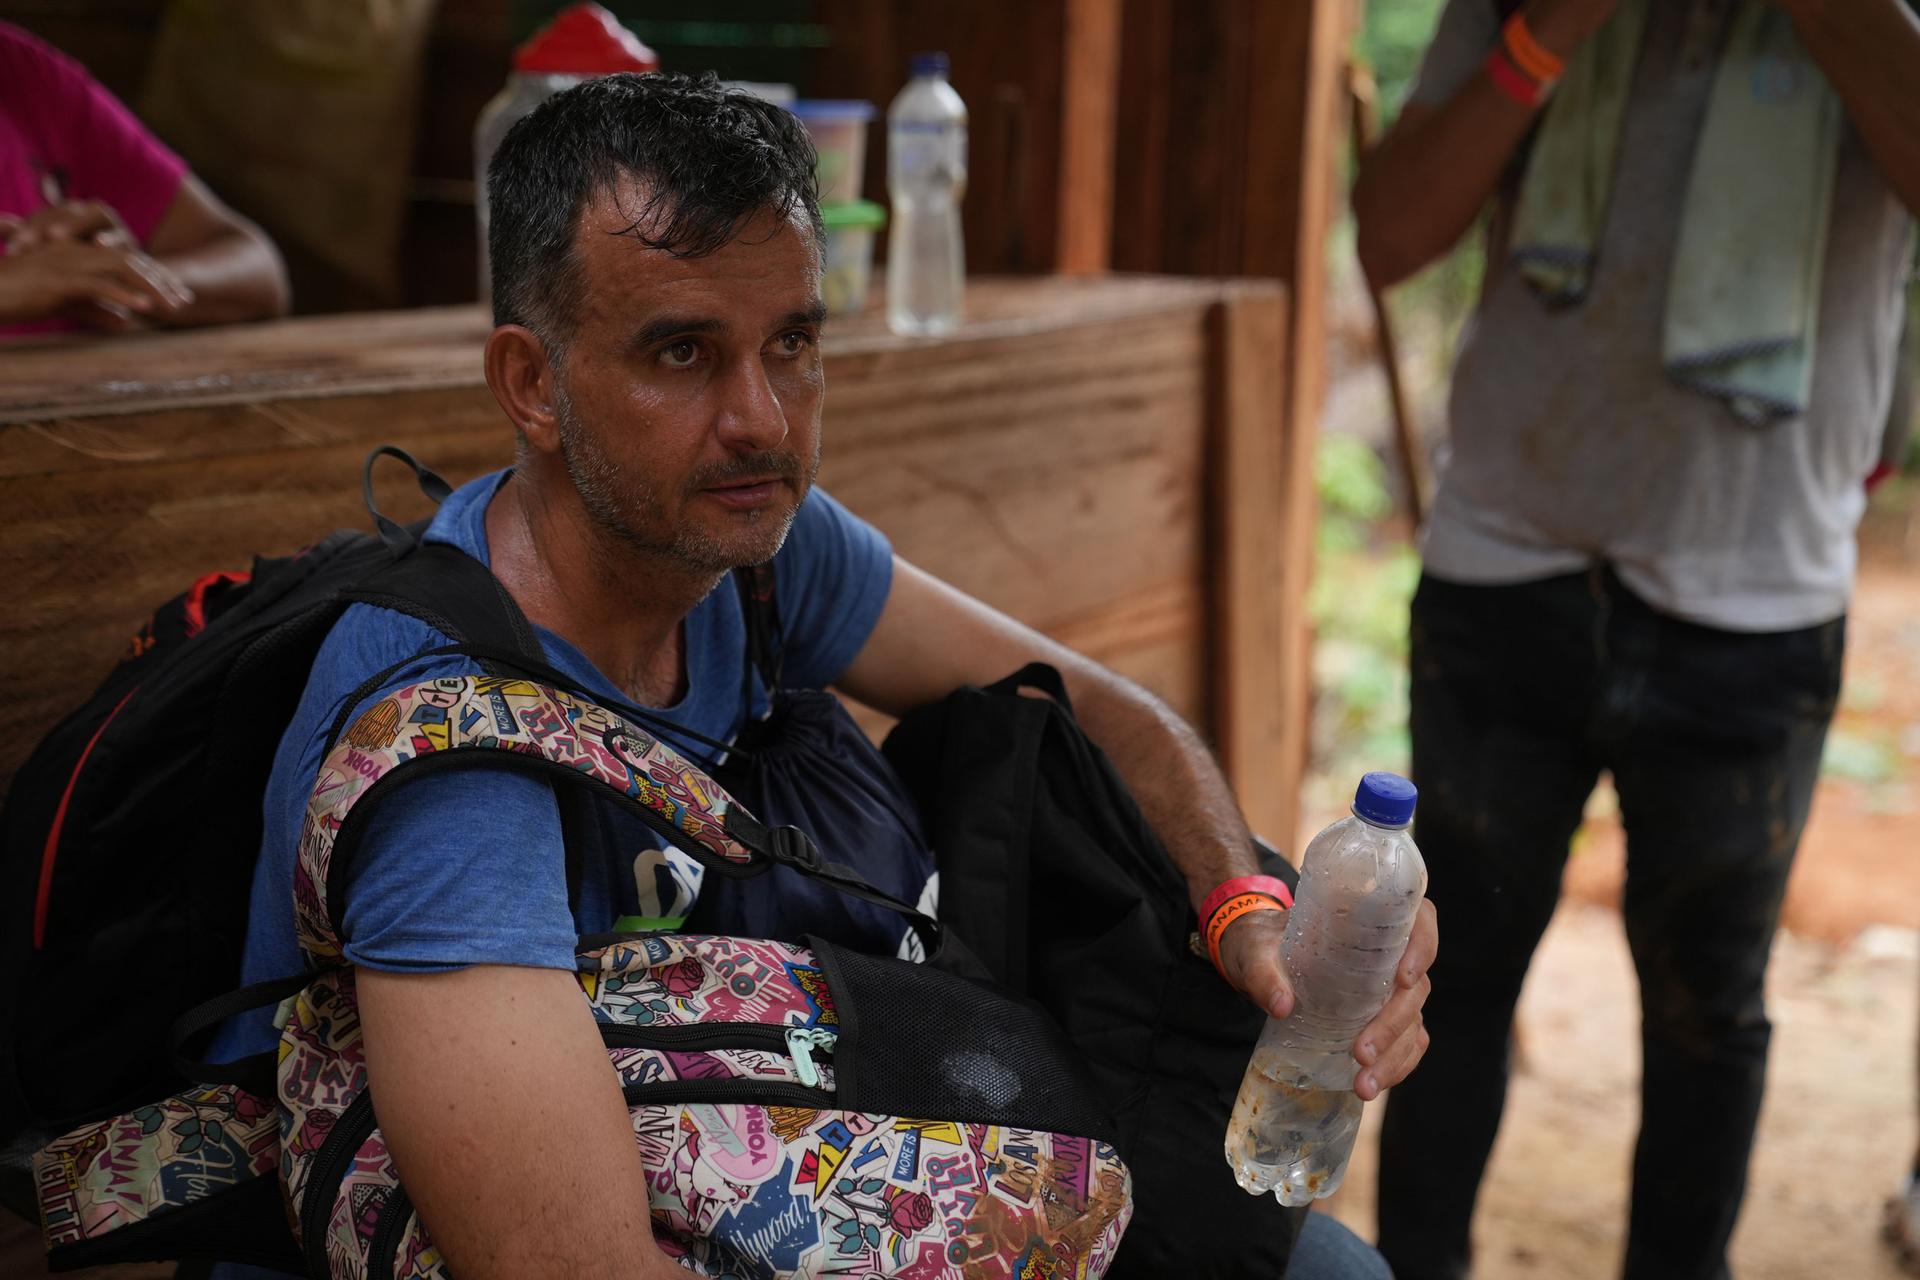 Onelio Bravo takes a break from walking at a rest stop in the Darien Gap. The trek across the jungle takes at least three days.